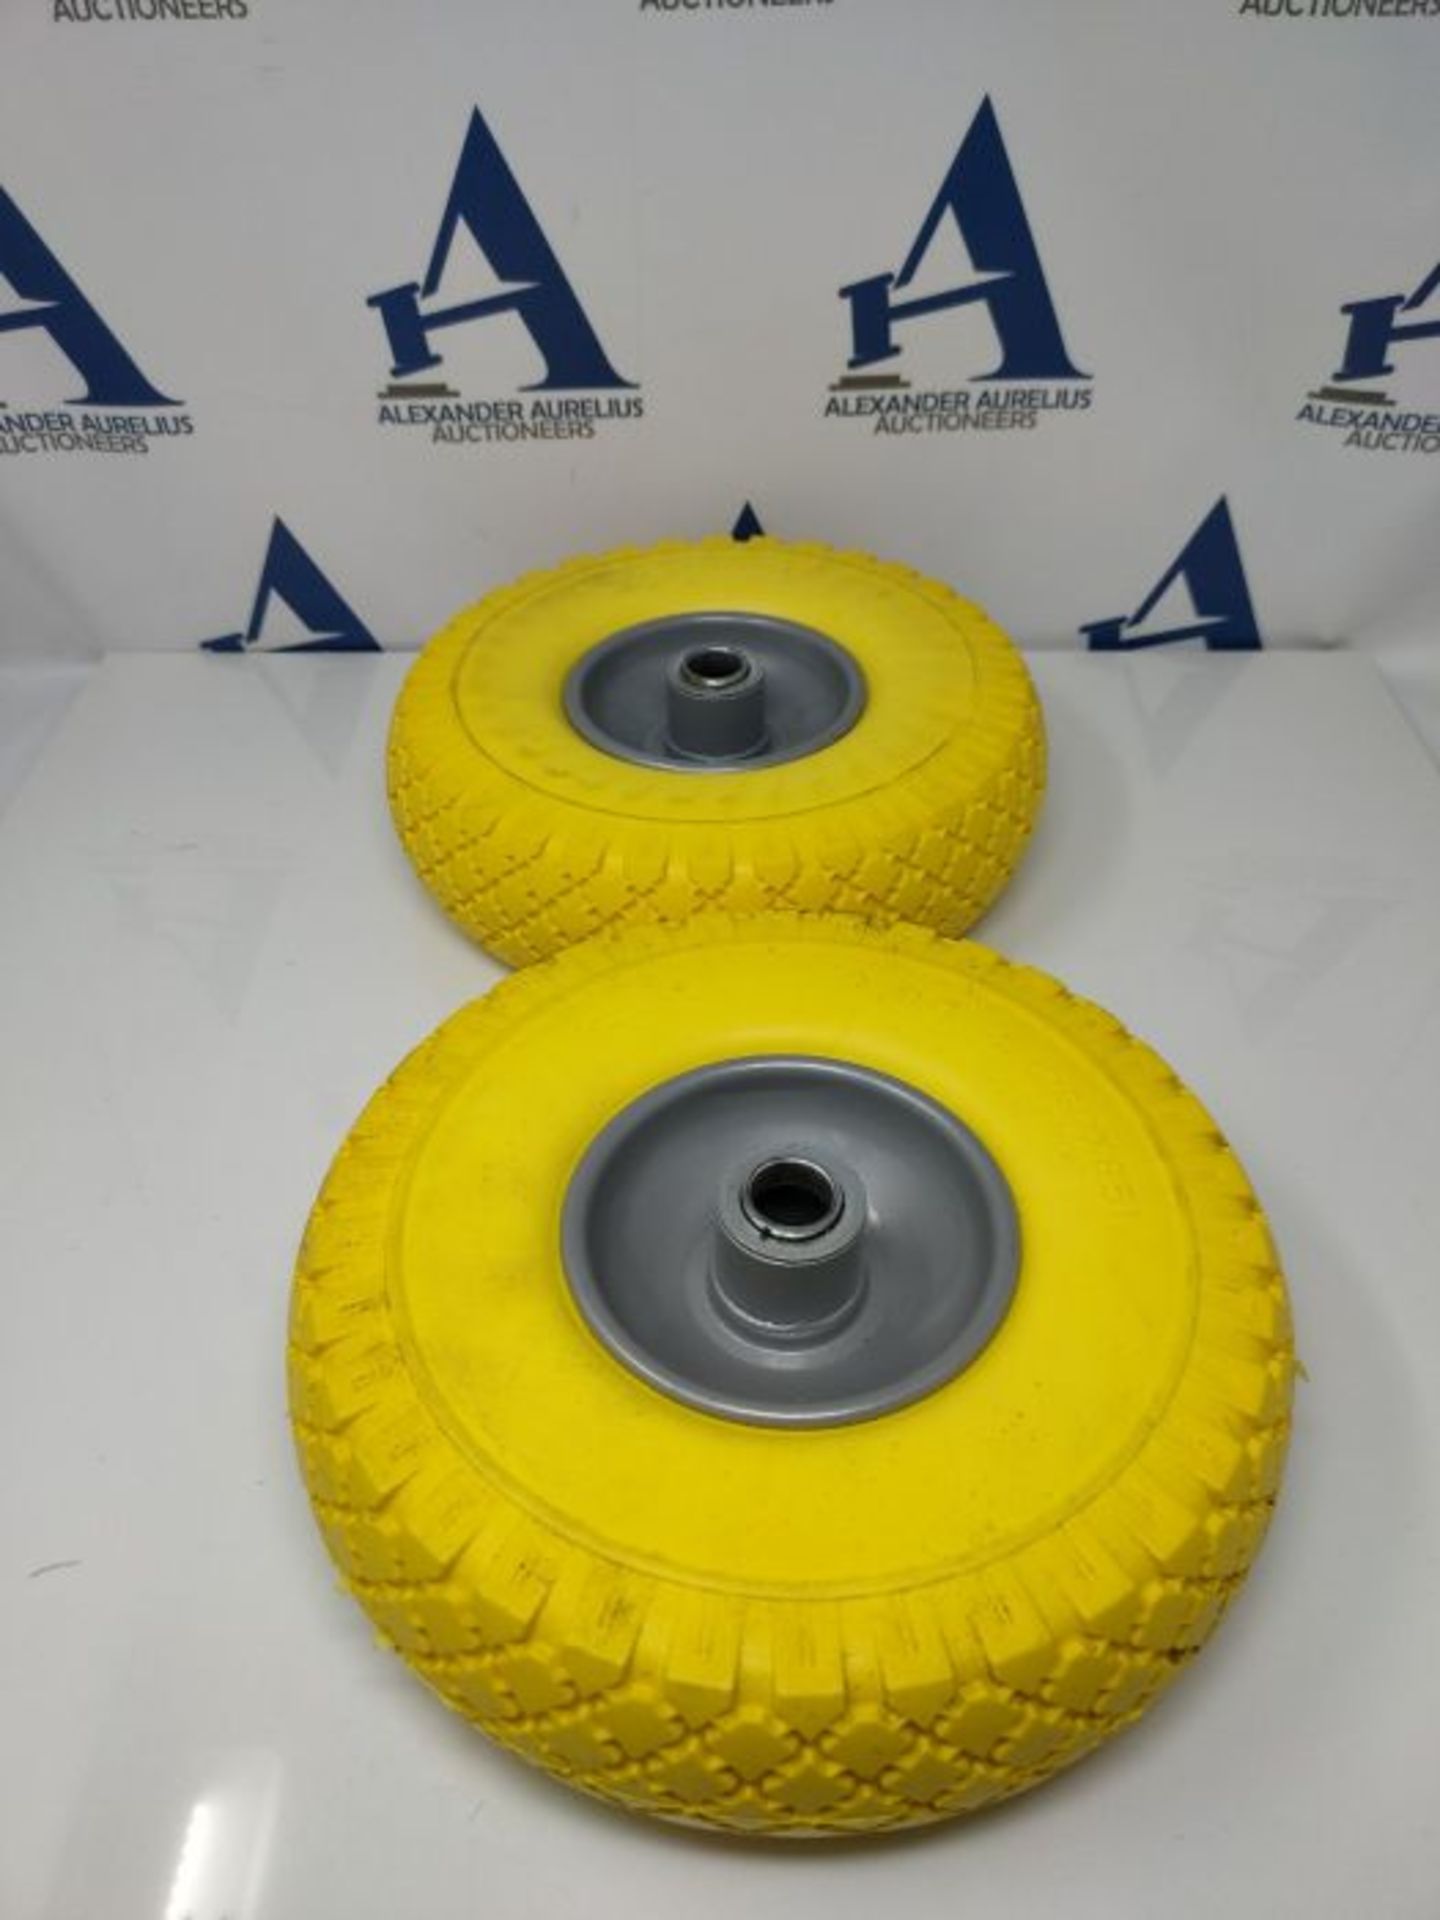 Relaxdays 2 x Hand Truck Tyre, Non-Flat Solid Rubber Wheels, 3.00-4?, 20mm Axle, 100 k - Image 2 of 2